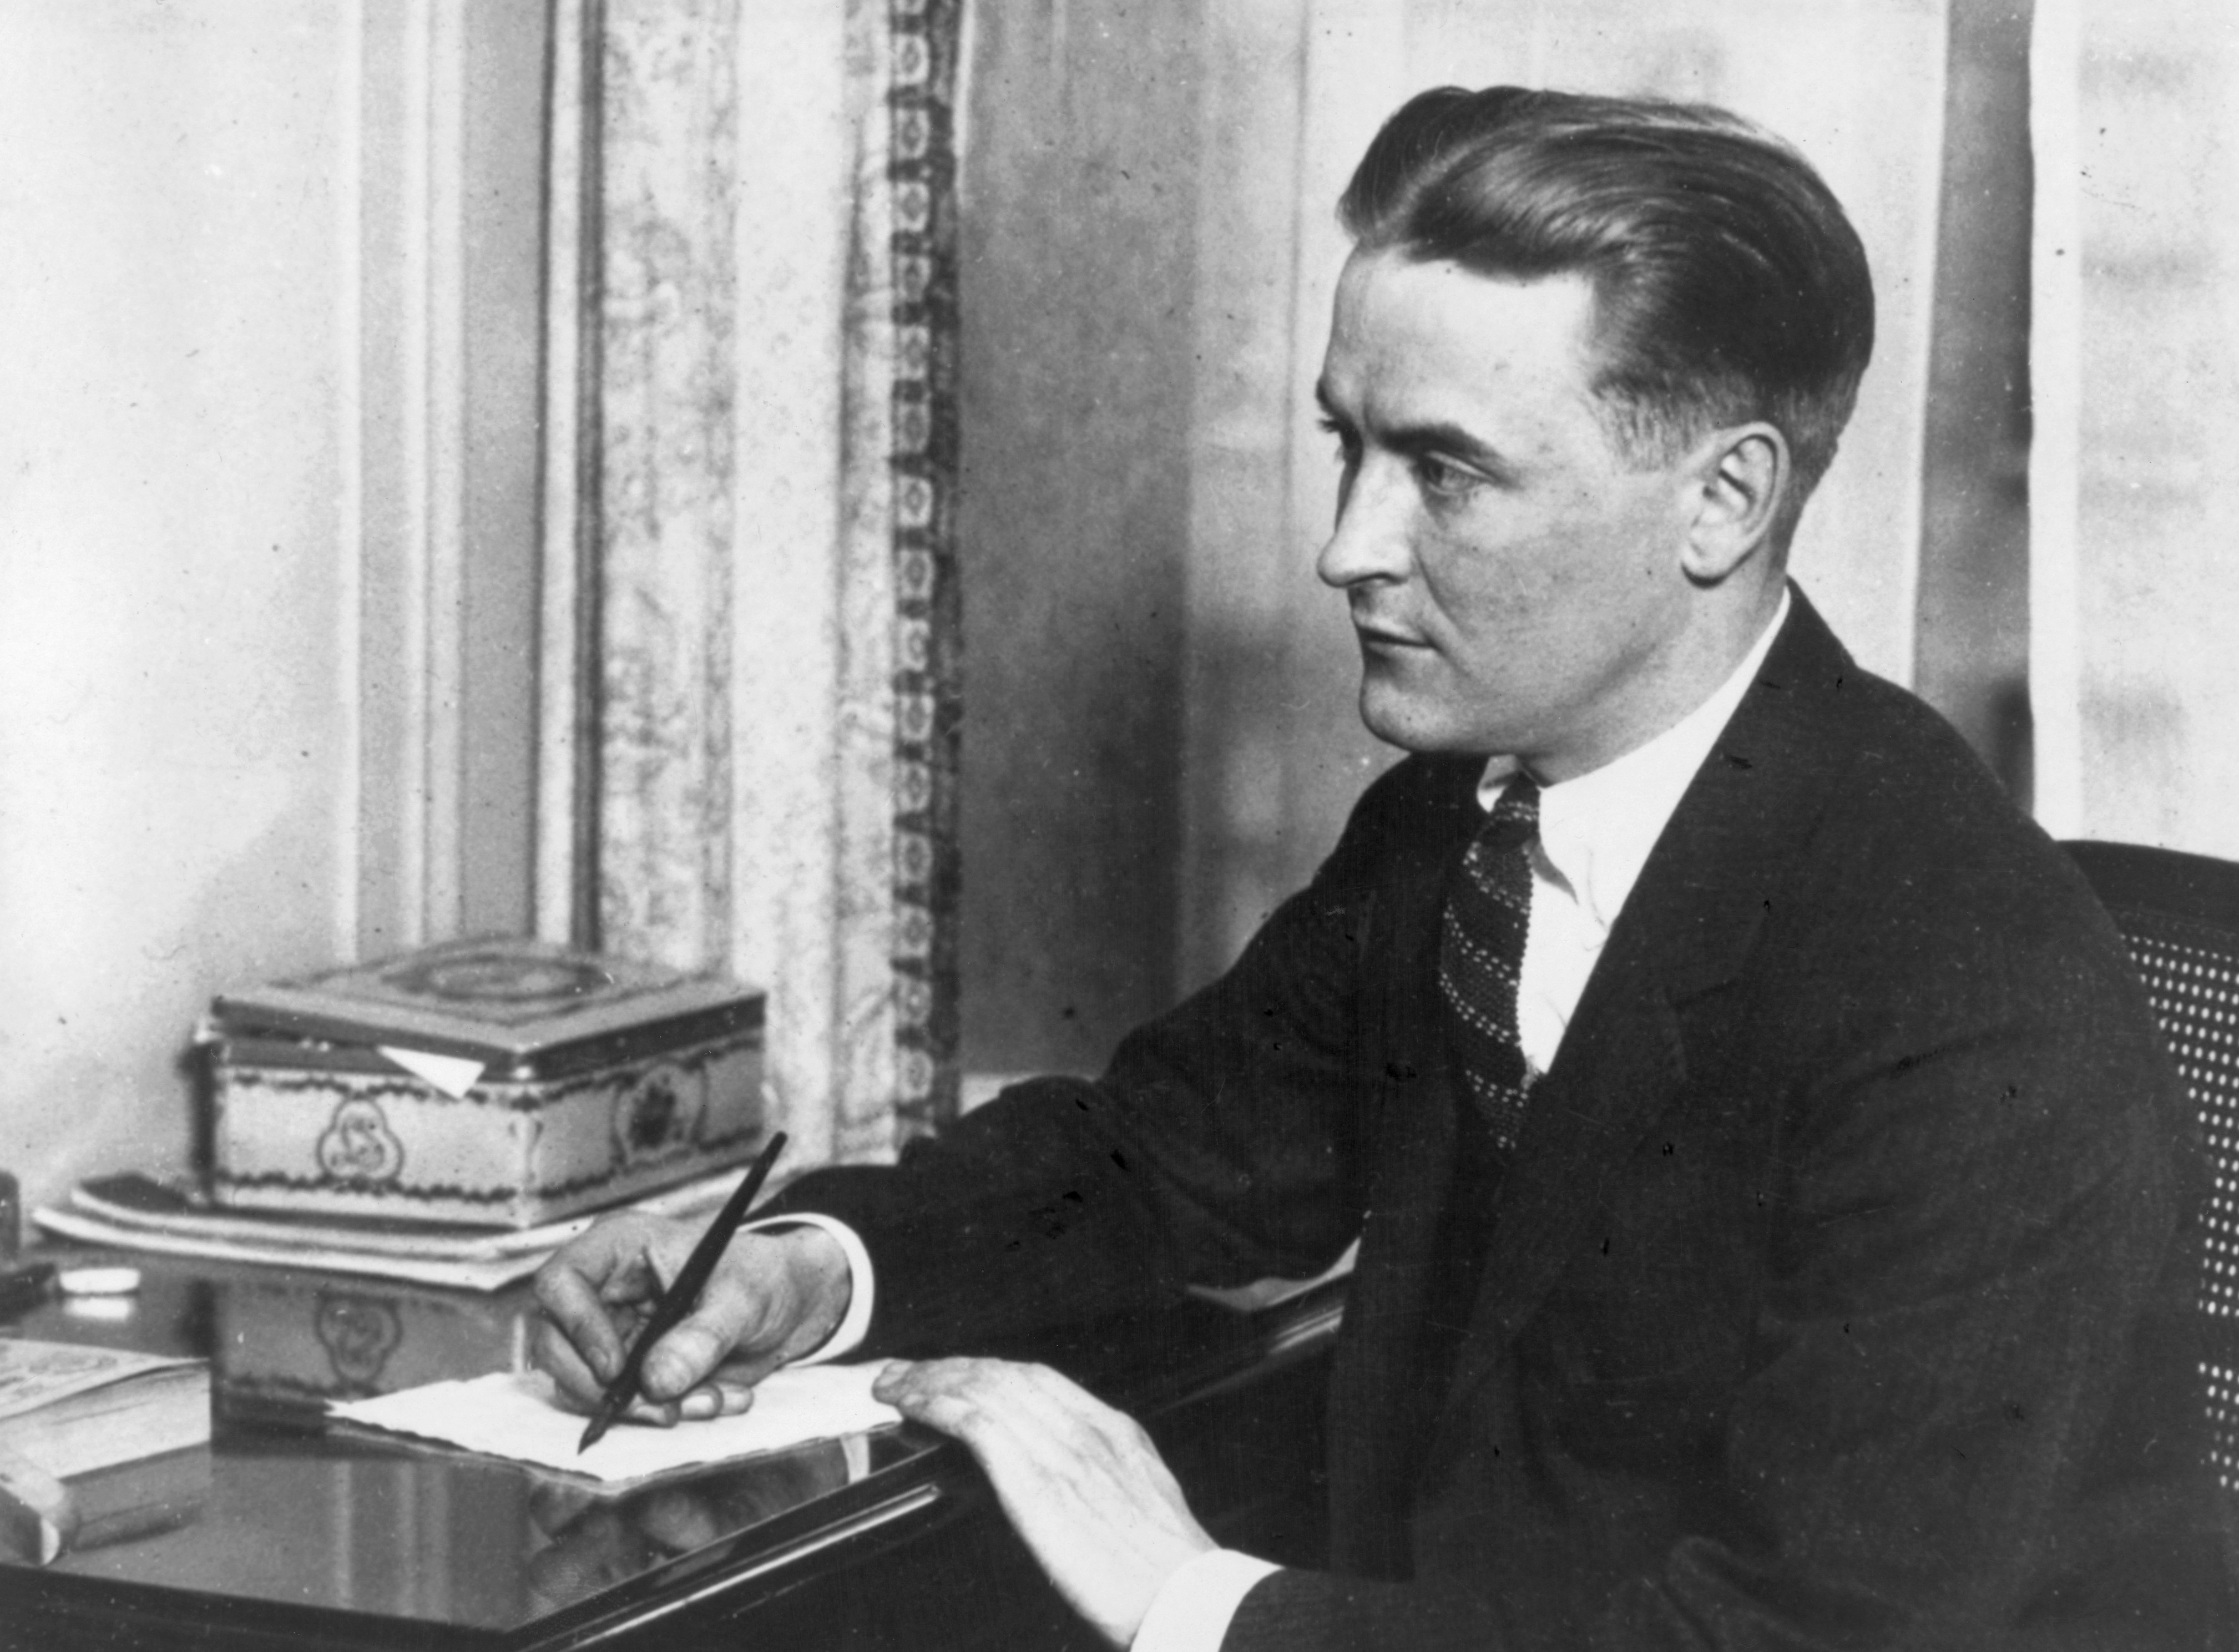 Fitzgerald went from epitome of the jazz age to burnt-out drunk.